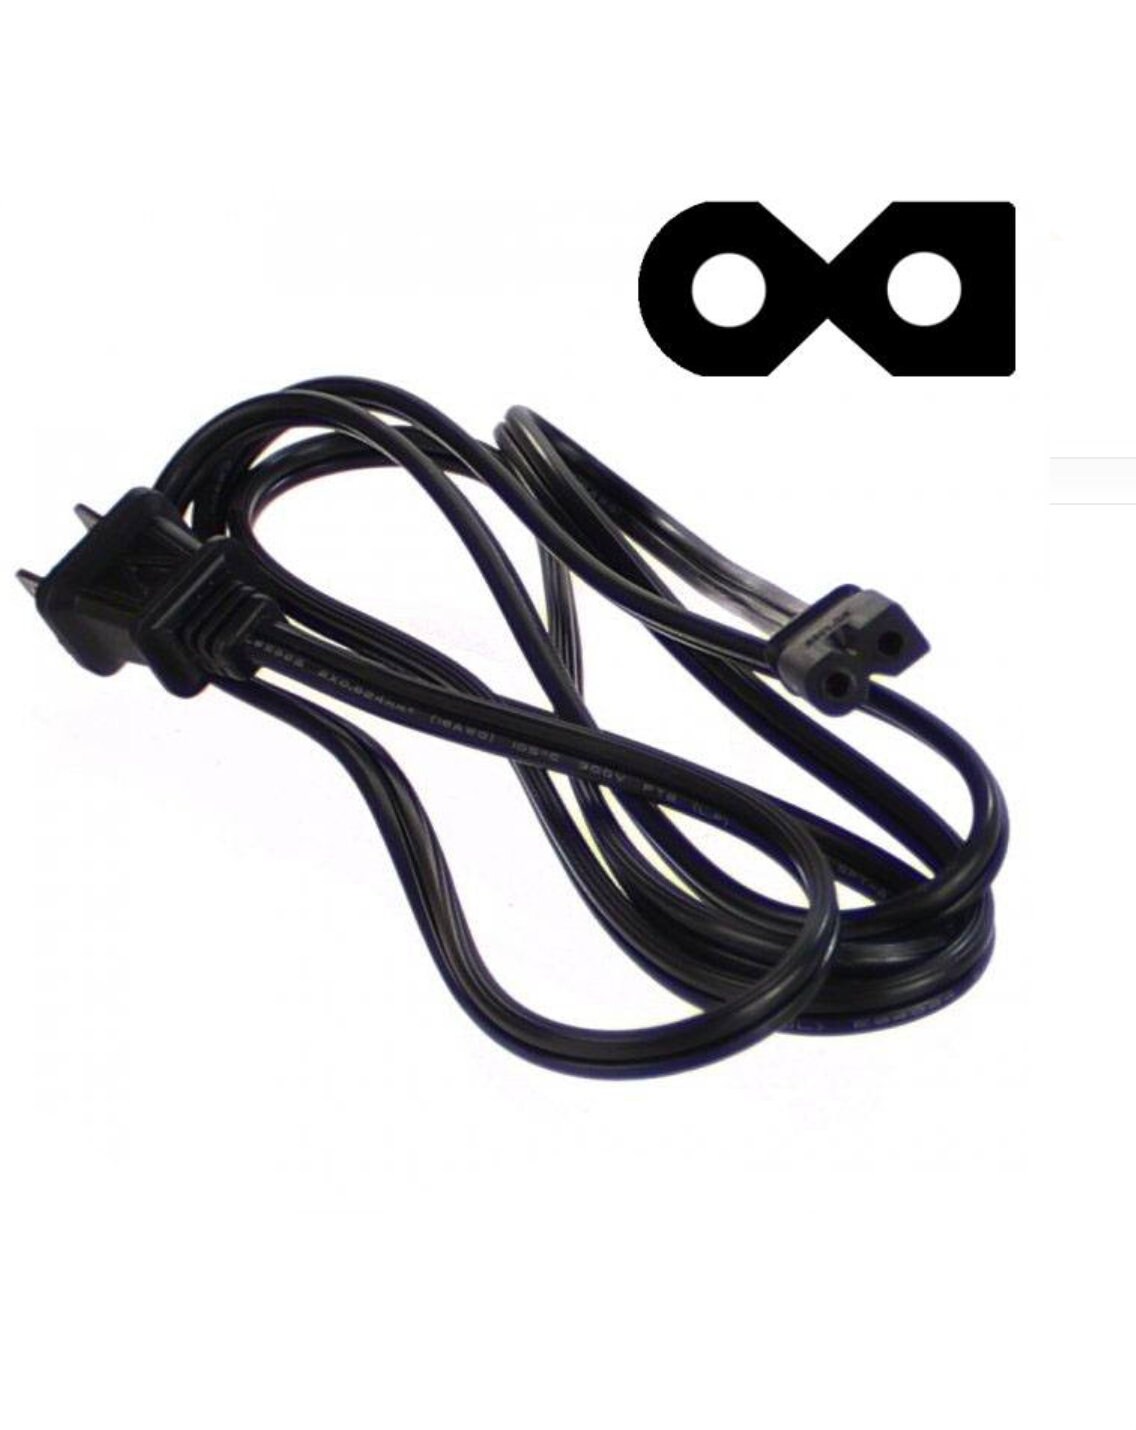 AC Power Cord Cable for SINGER JUKI PFAFF #X50018001 Brother